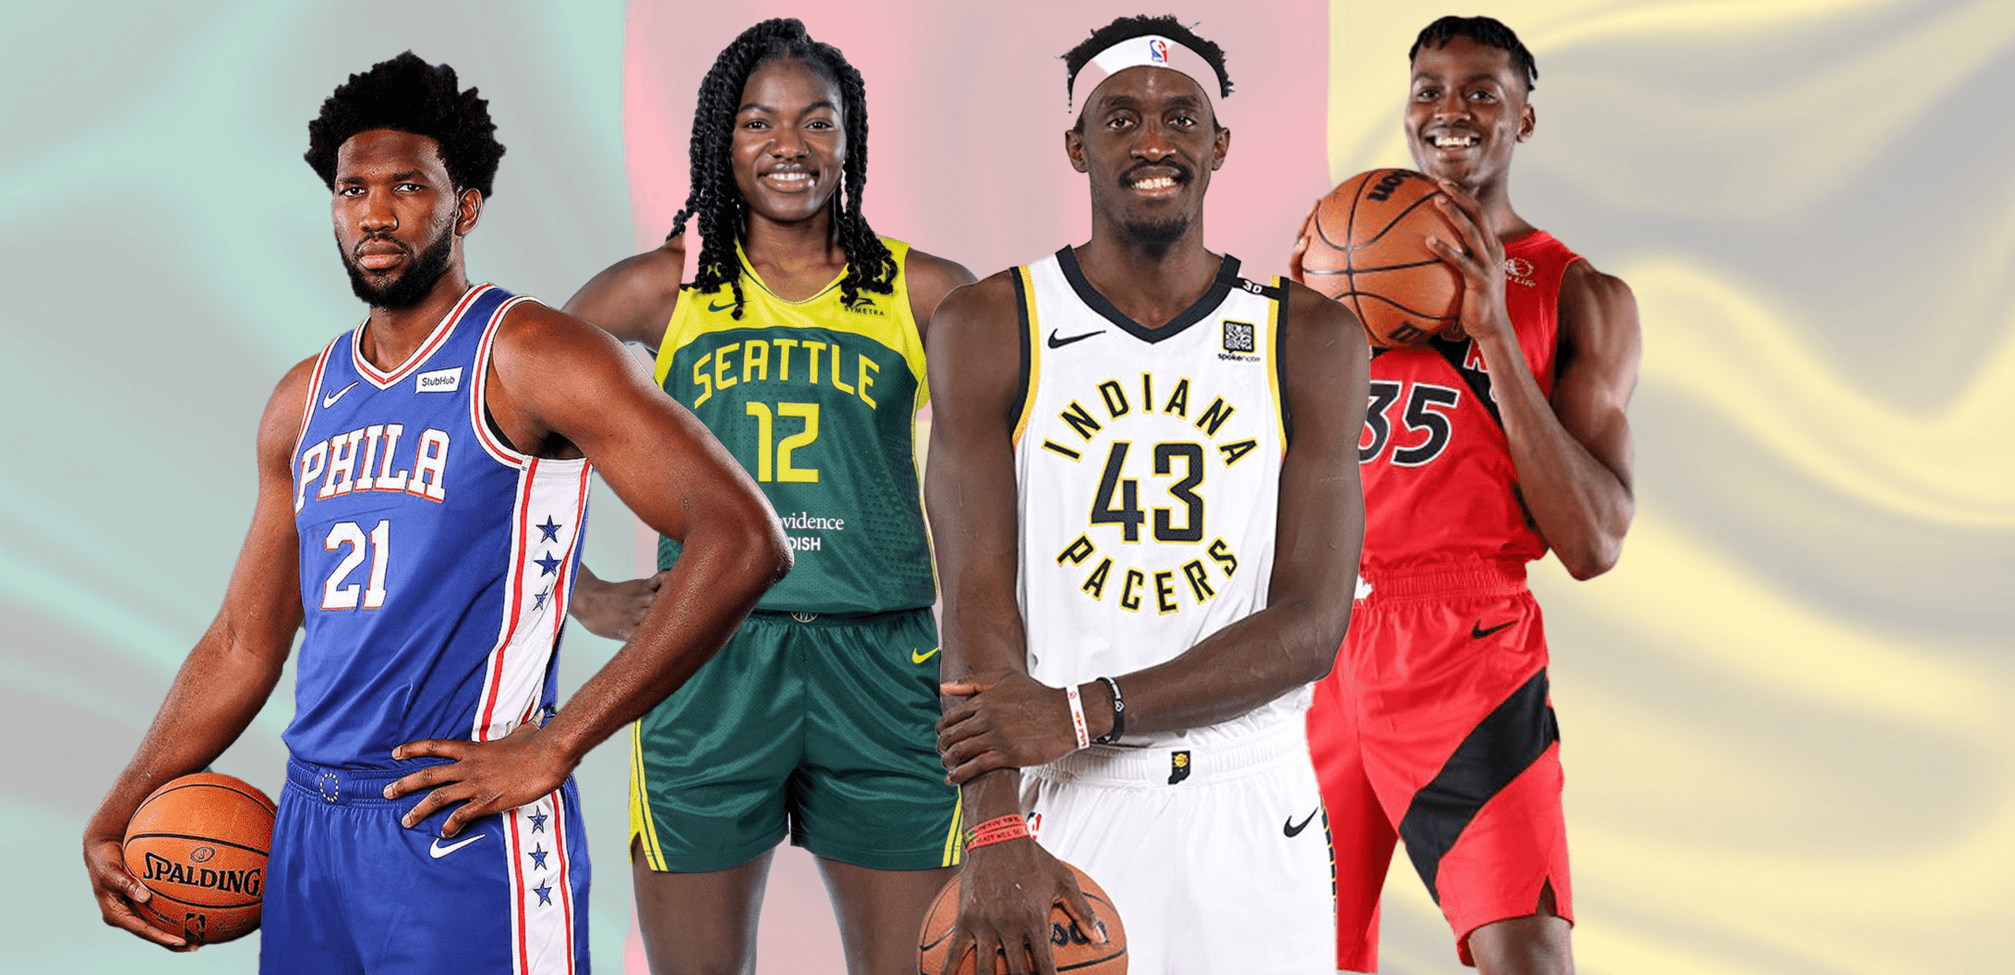 Cameroonians playing in the NBA From Left (Embiid, Fonkam, Siakam, Koloko)